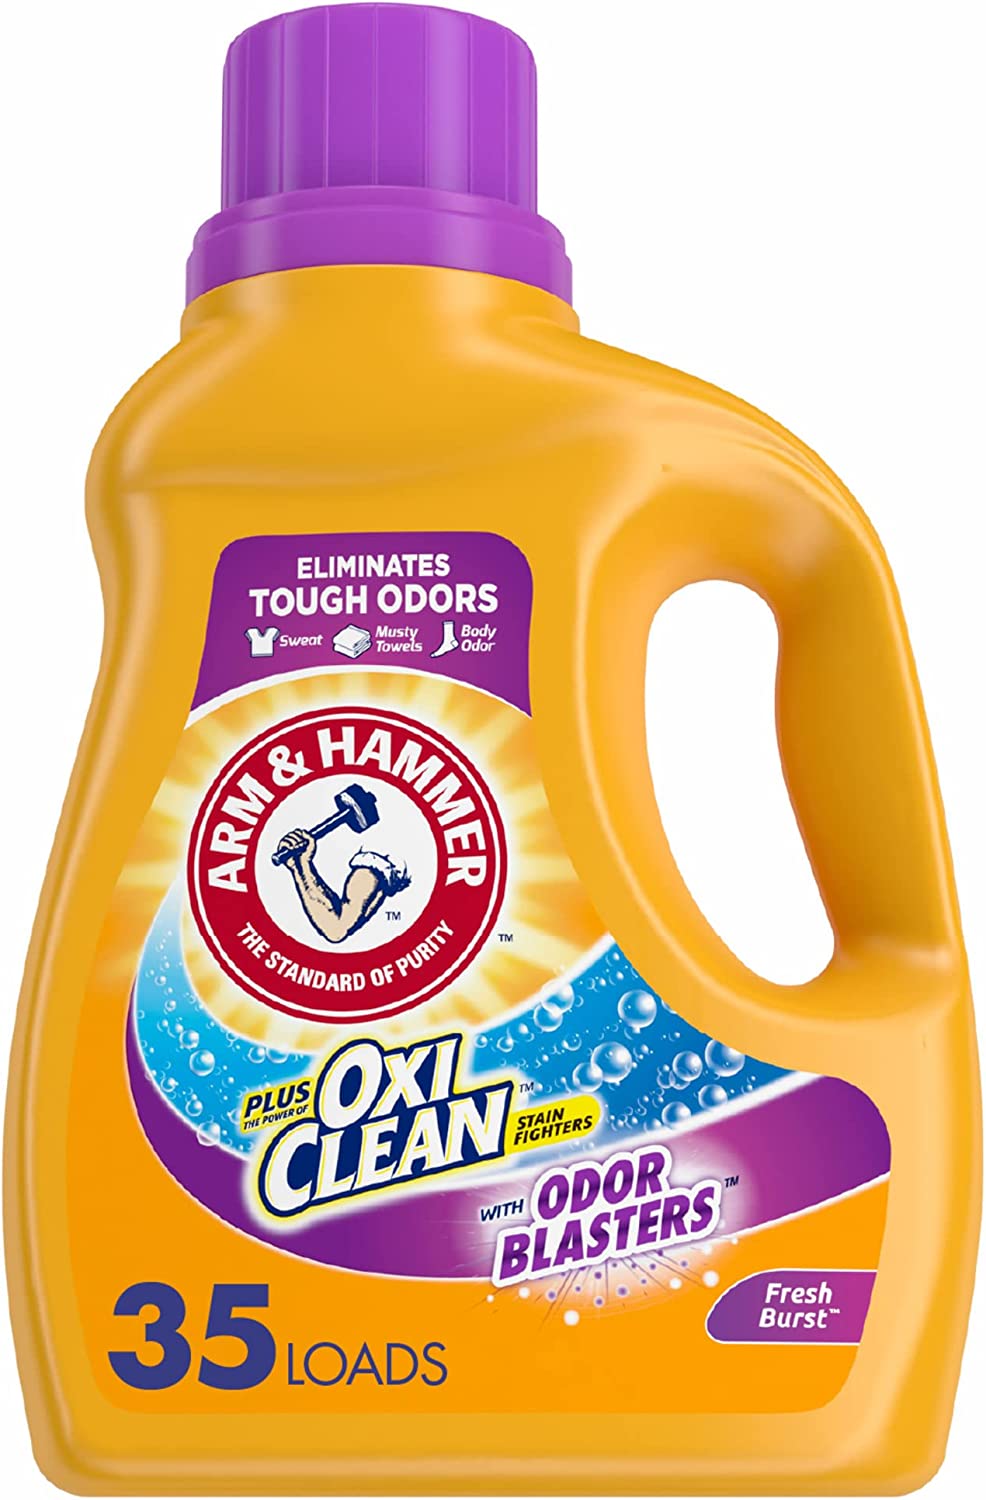 Arm _ Hammer Plus OxiClean Odor Blasters Laundry Detergent